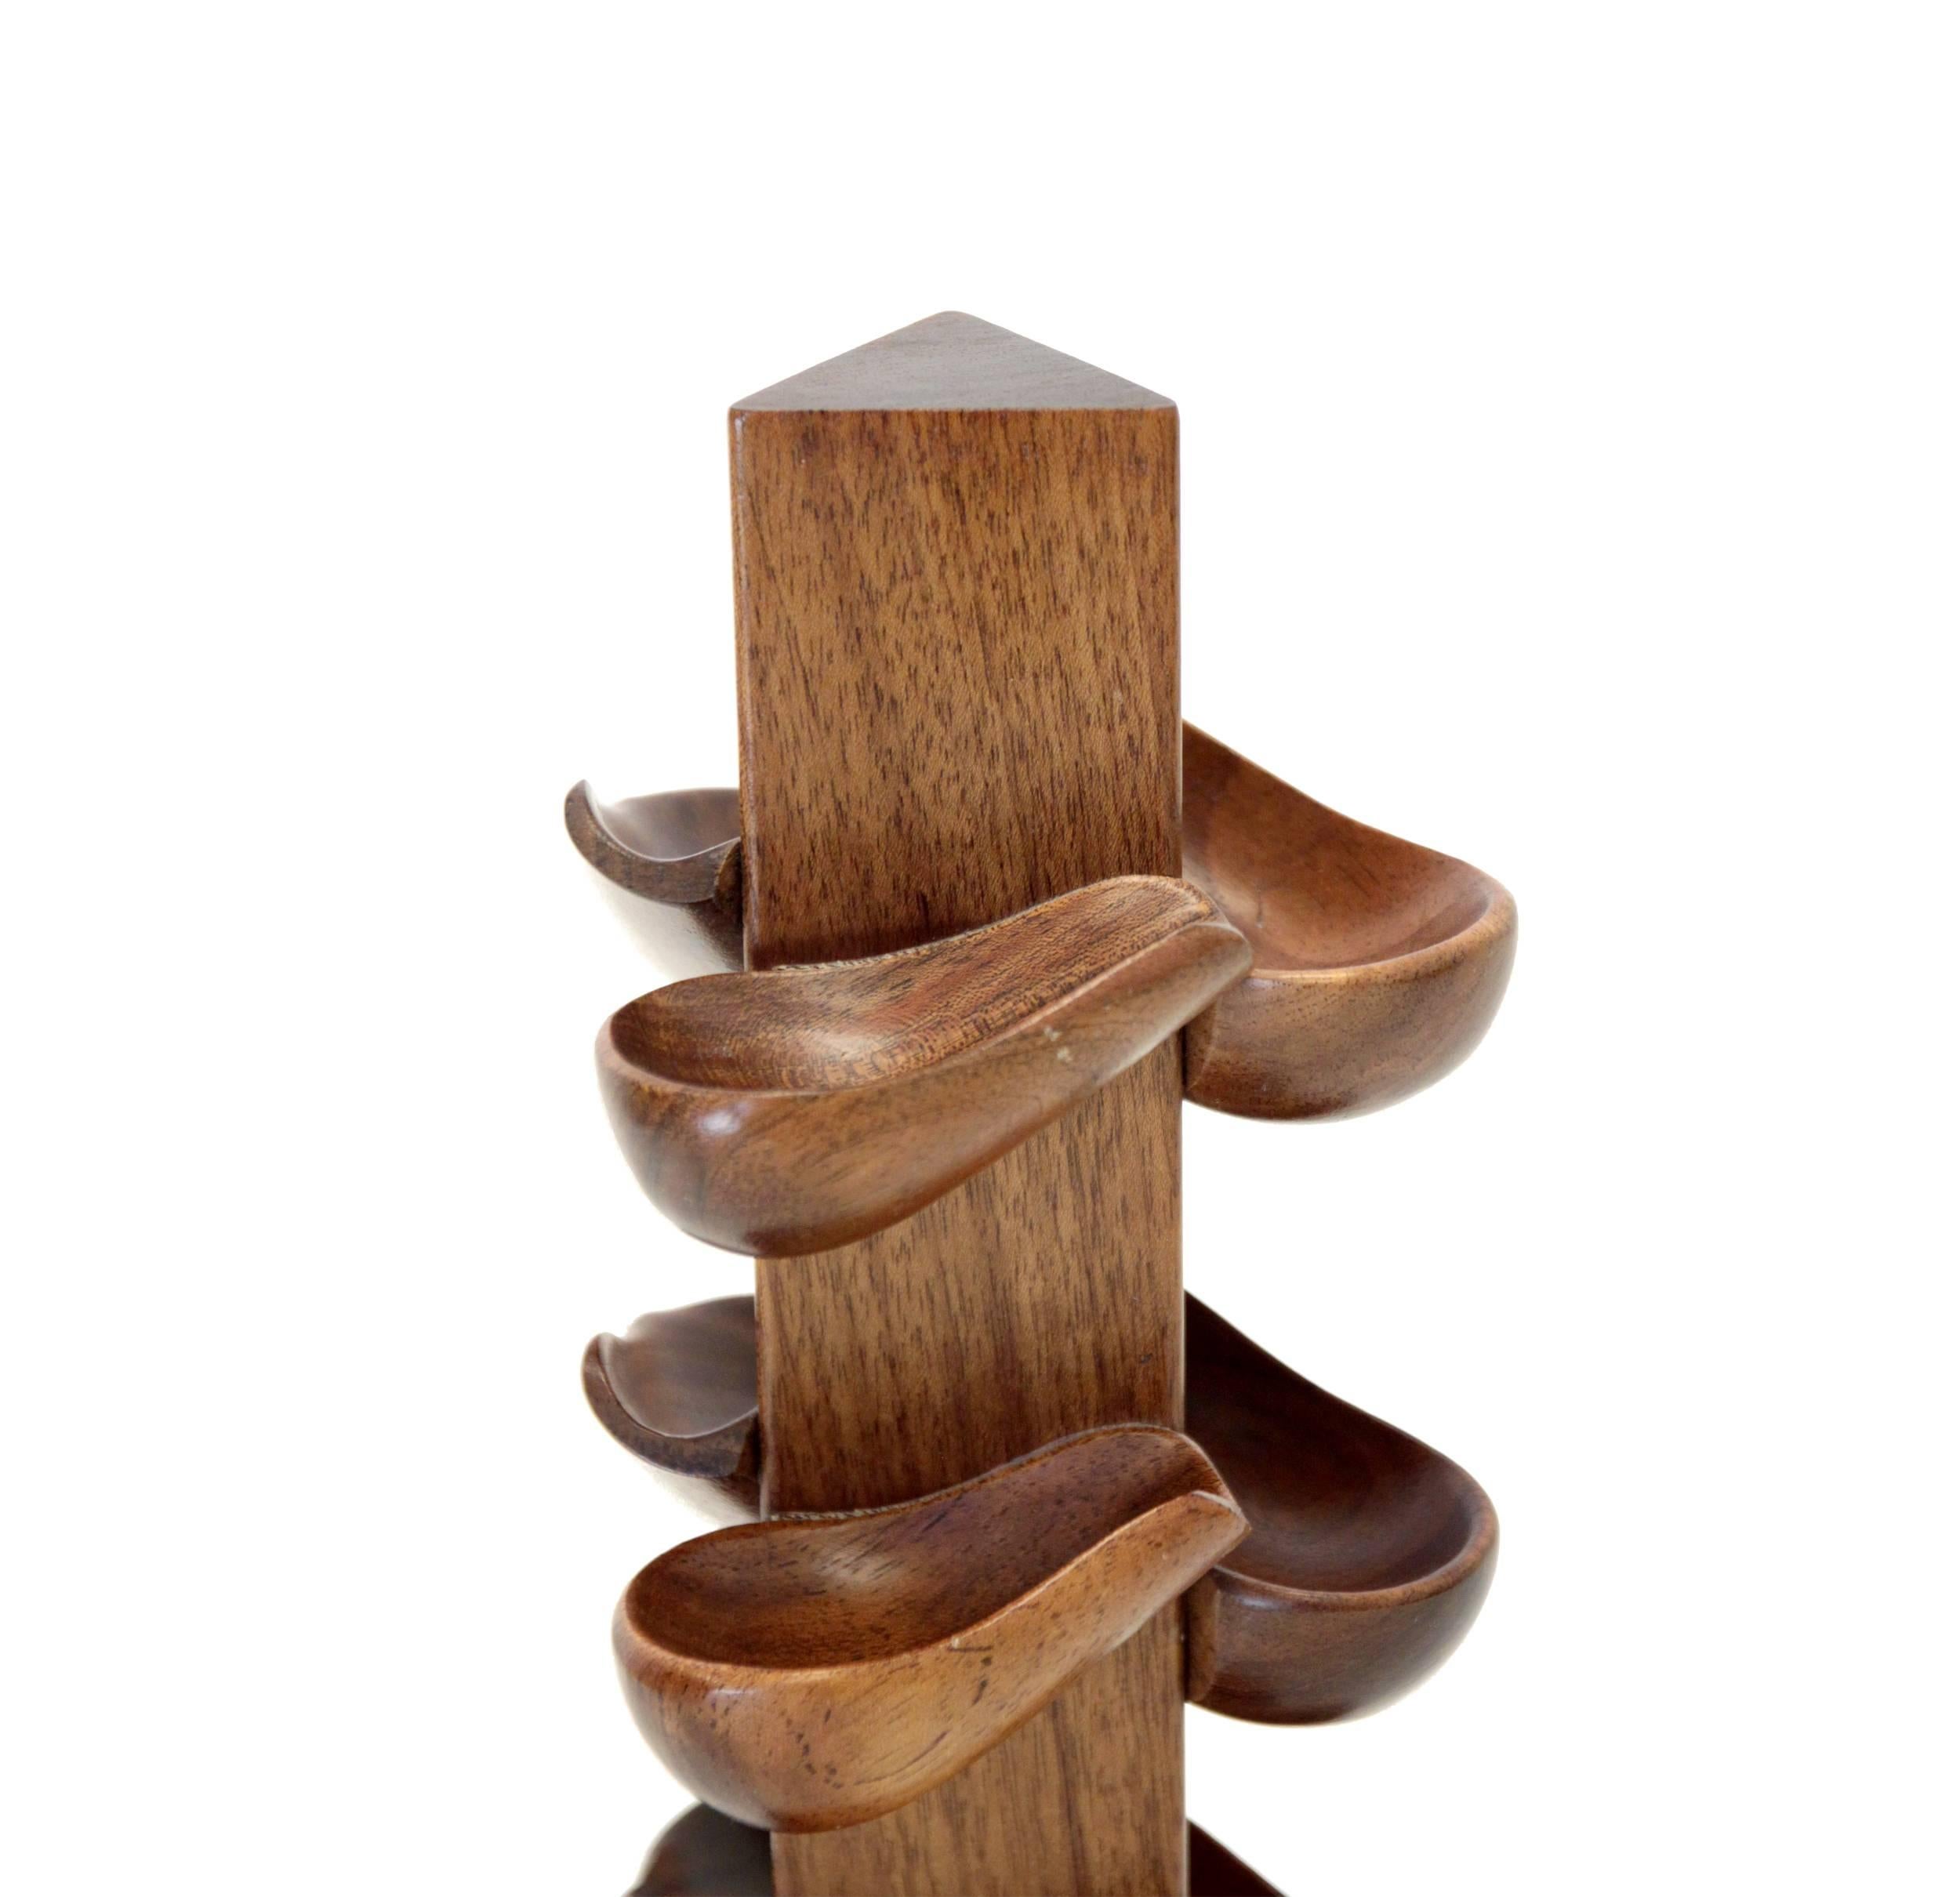 Sculptural pipe holder on a teak frame with a 12 pipe capacity.

Made in Italy bu Ro-El.

The pipe stand is in excellent vintage condition.